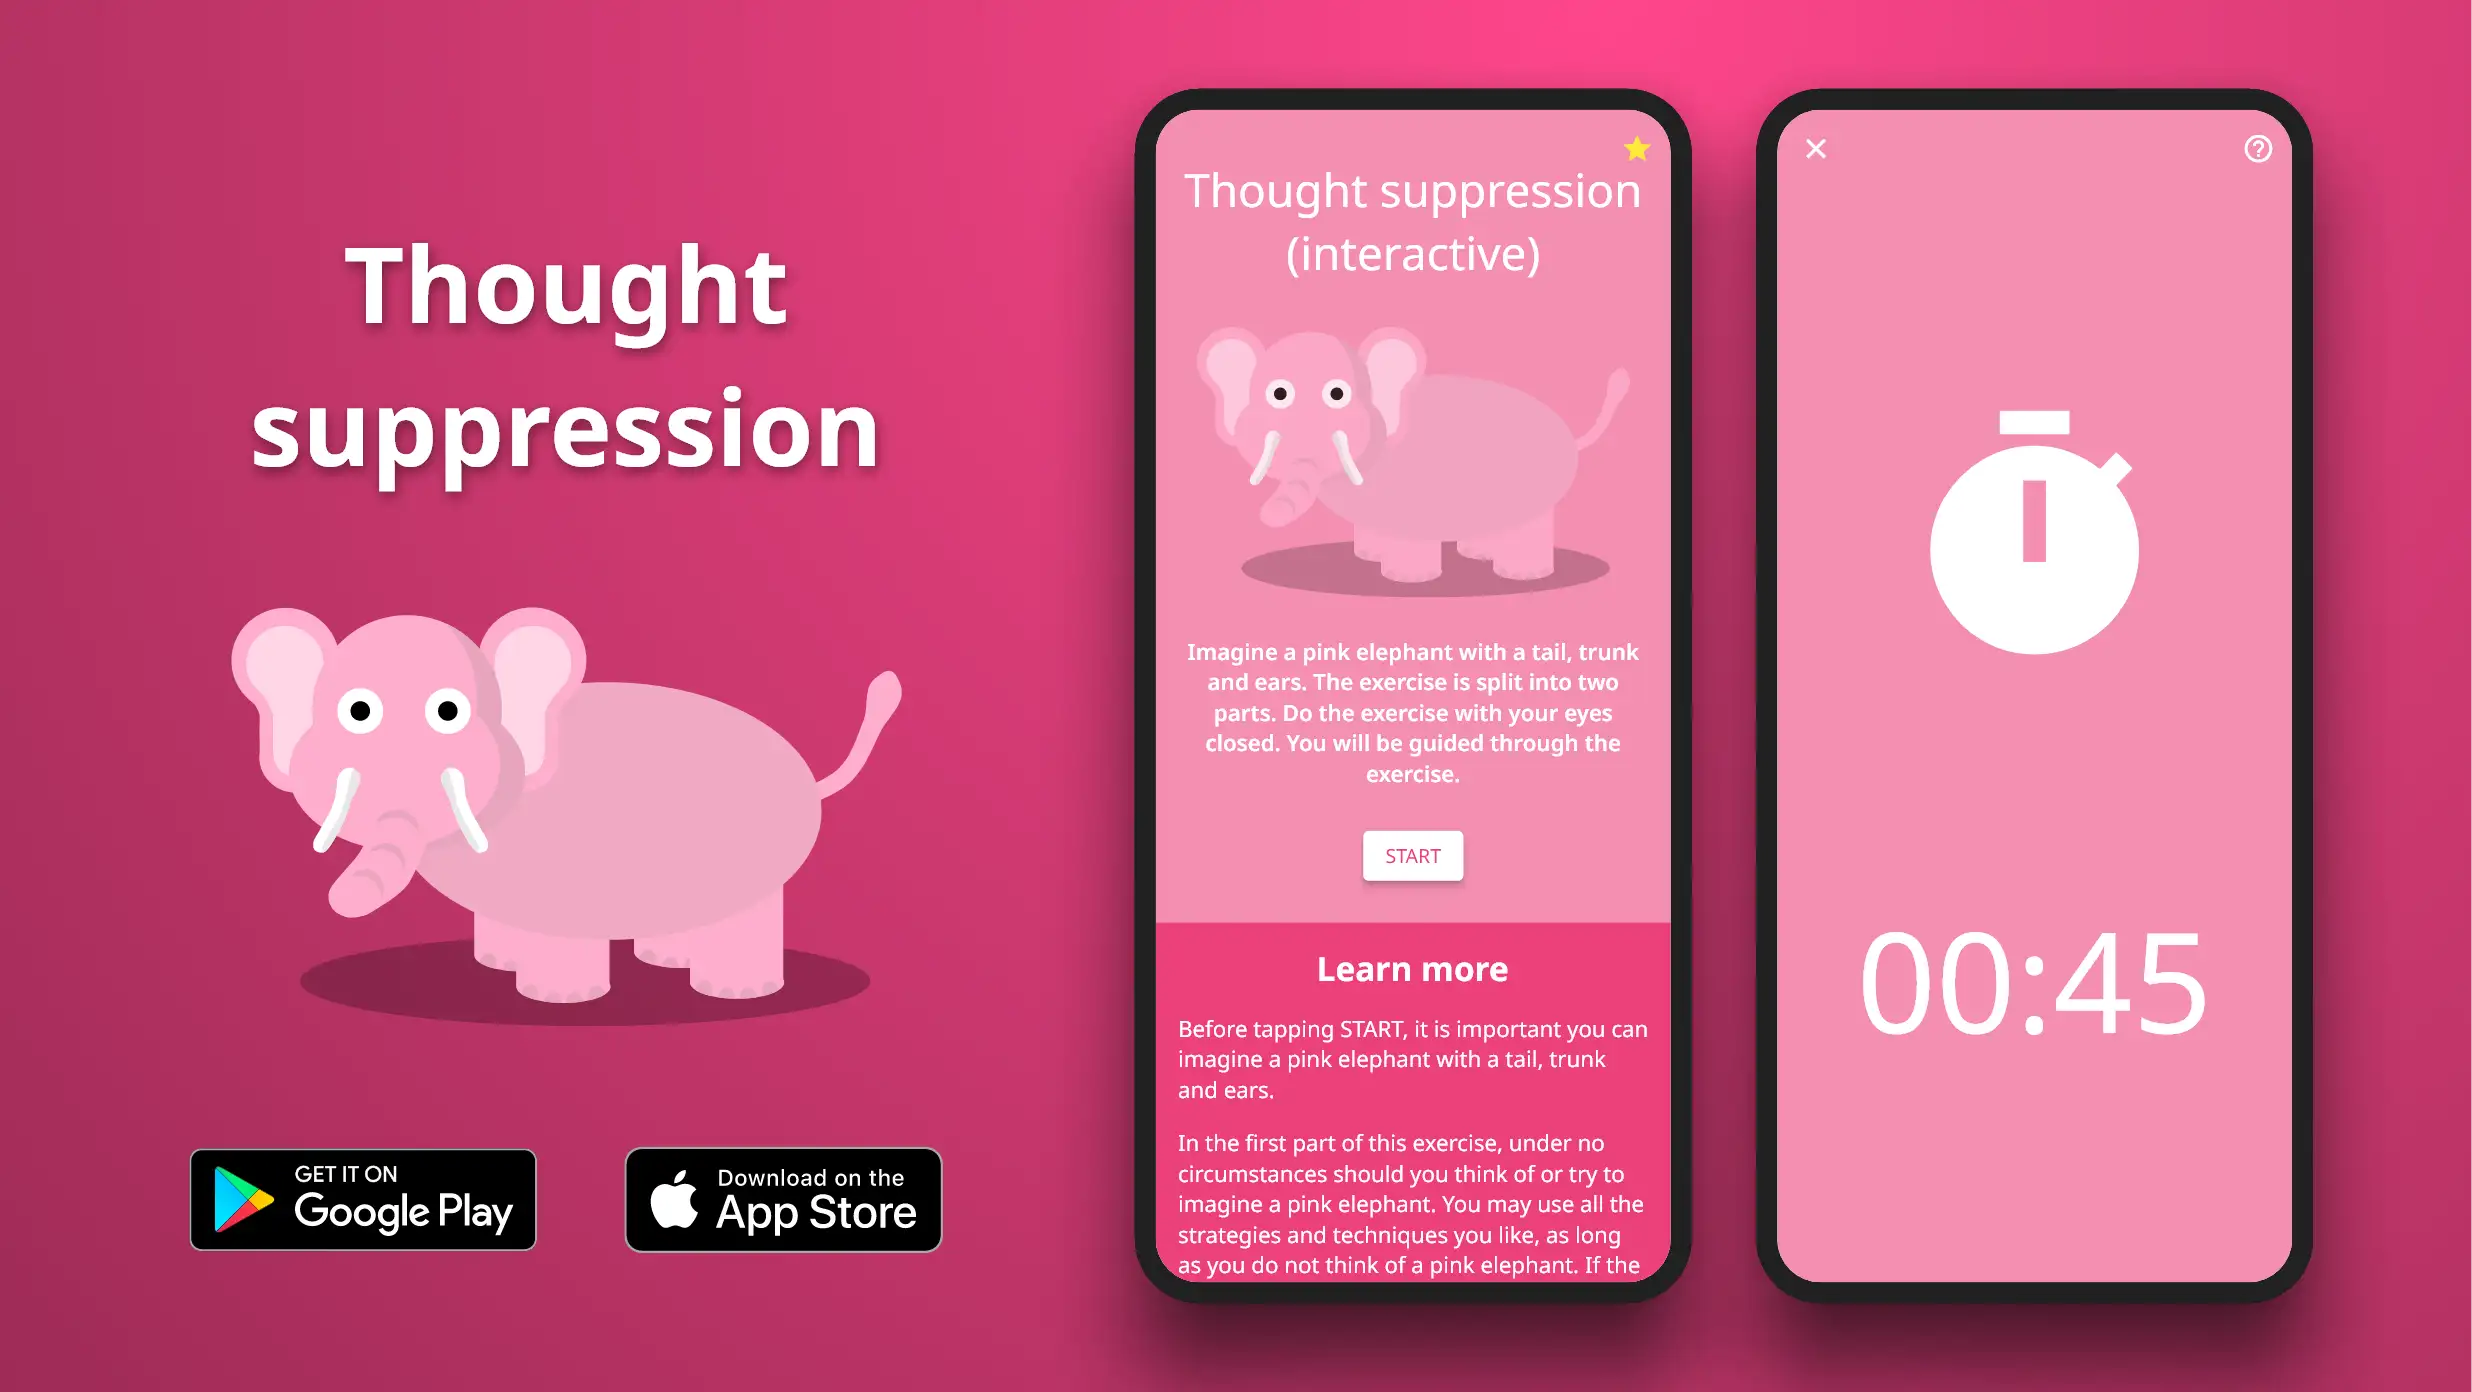 Thought suppression exercise in the Meta Learn app.